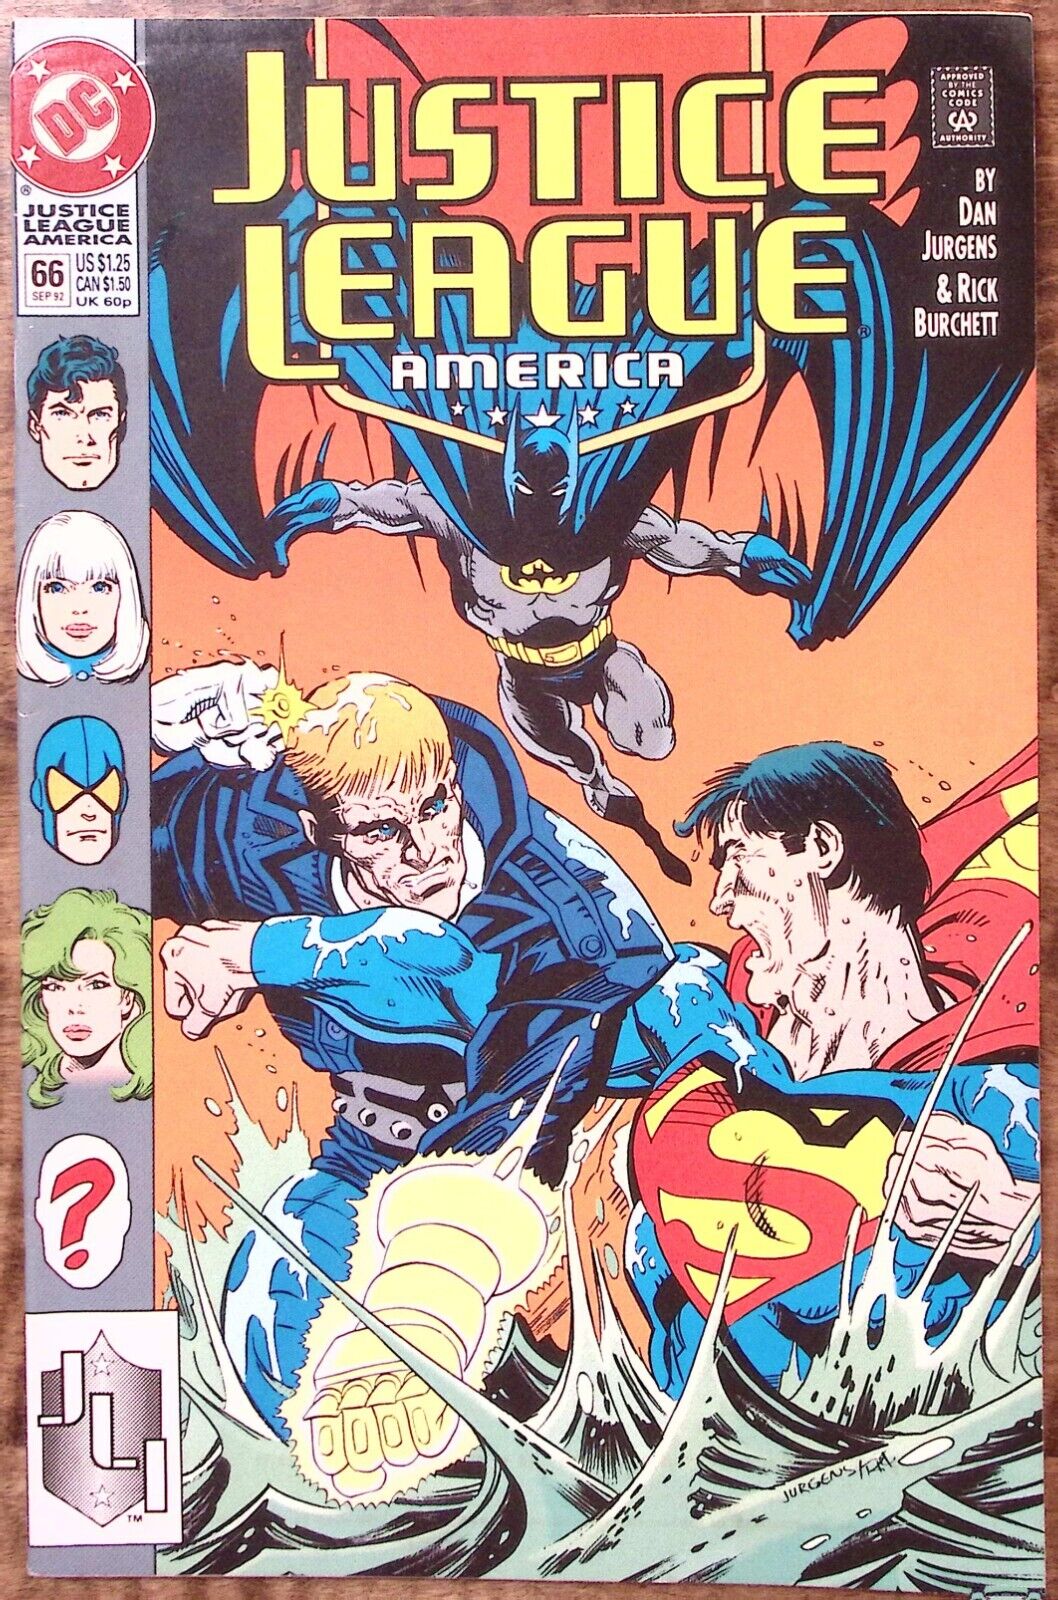 1992 JUSTICE LEAGUE AMERICA SEPT #66 TOGETHER AGAIN DC COMICS EXC Z3359